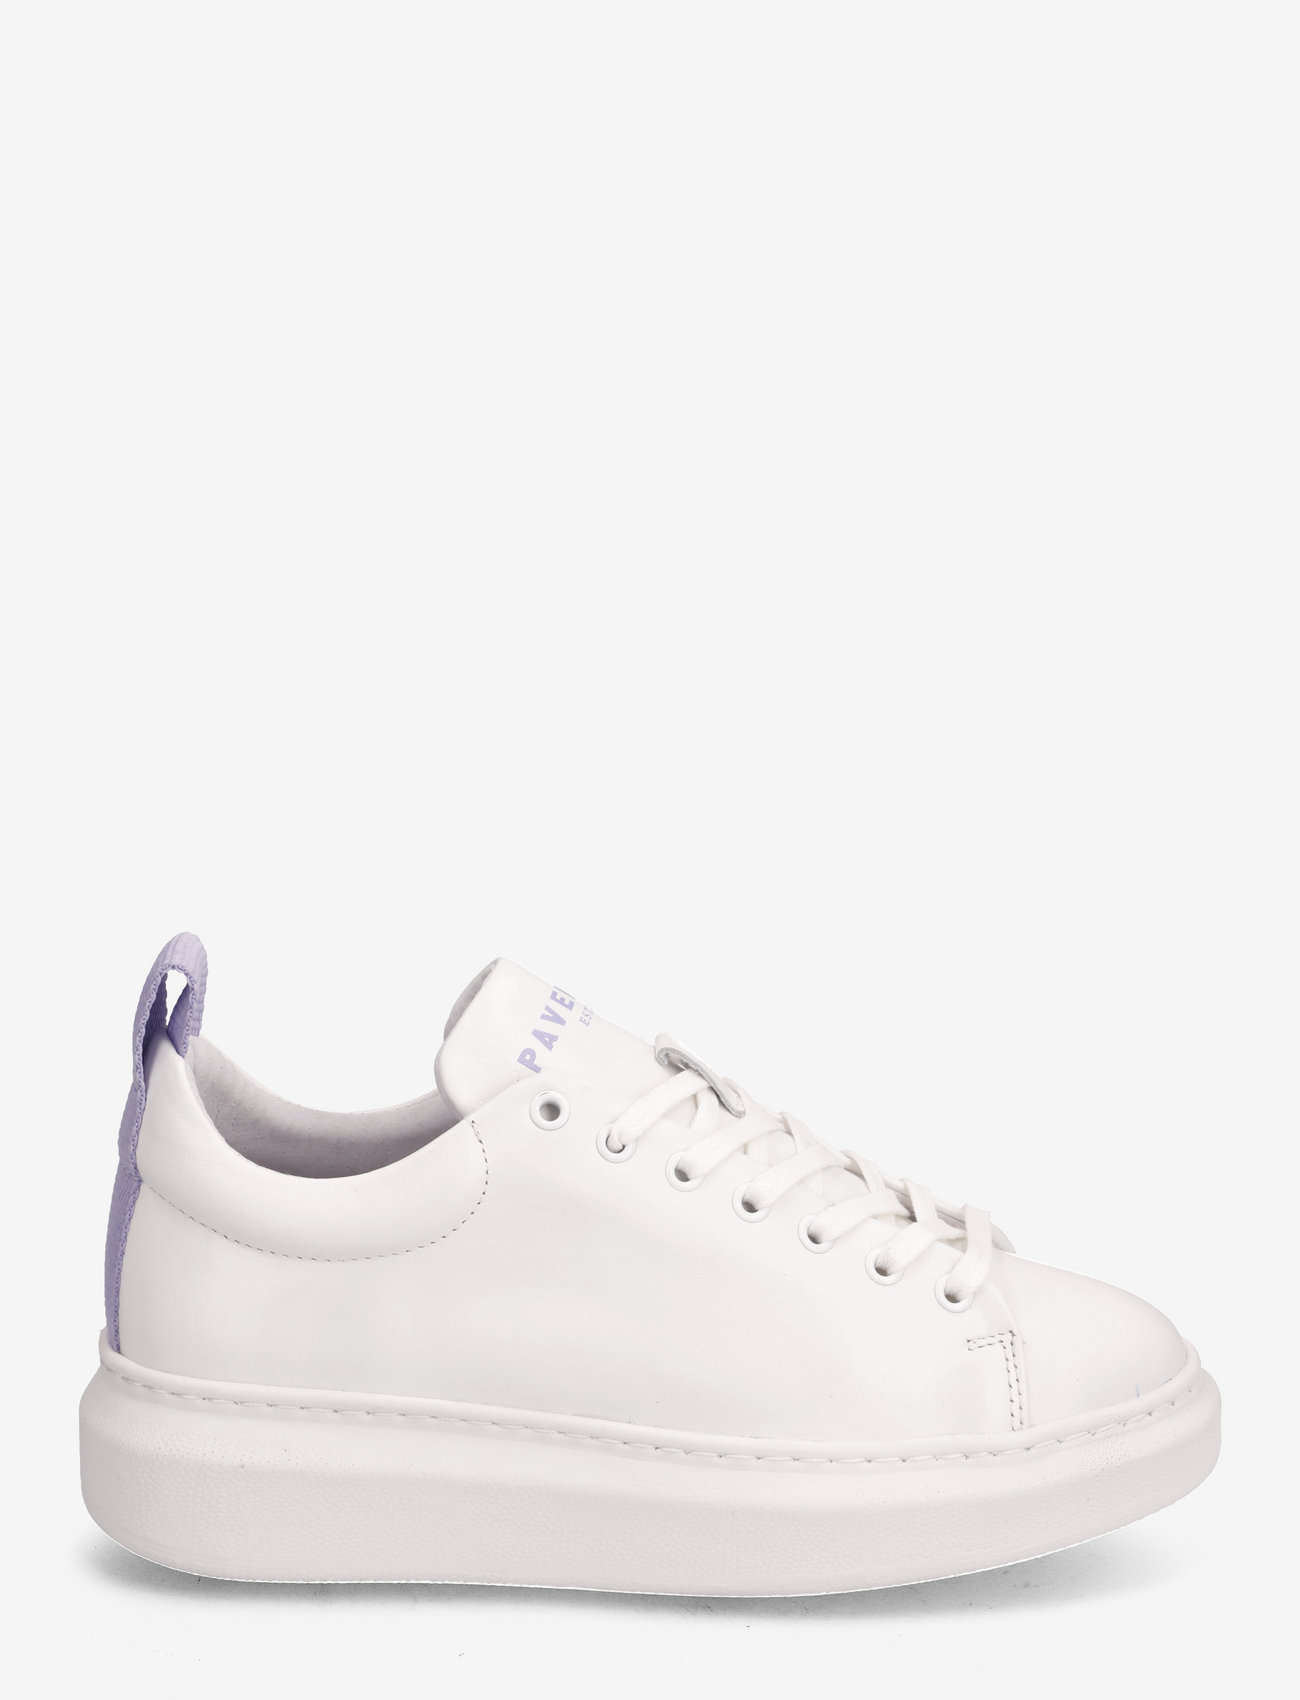 Pavement - Dee color - low top sneakers - white/purple - 1